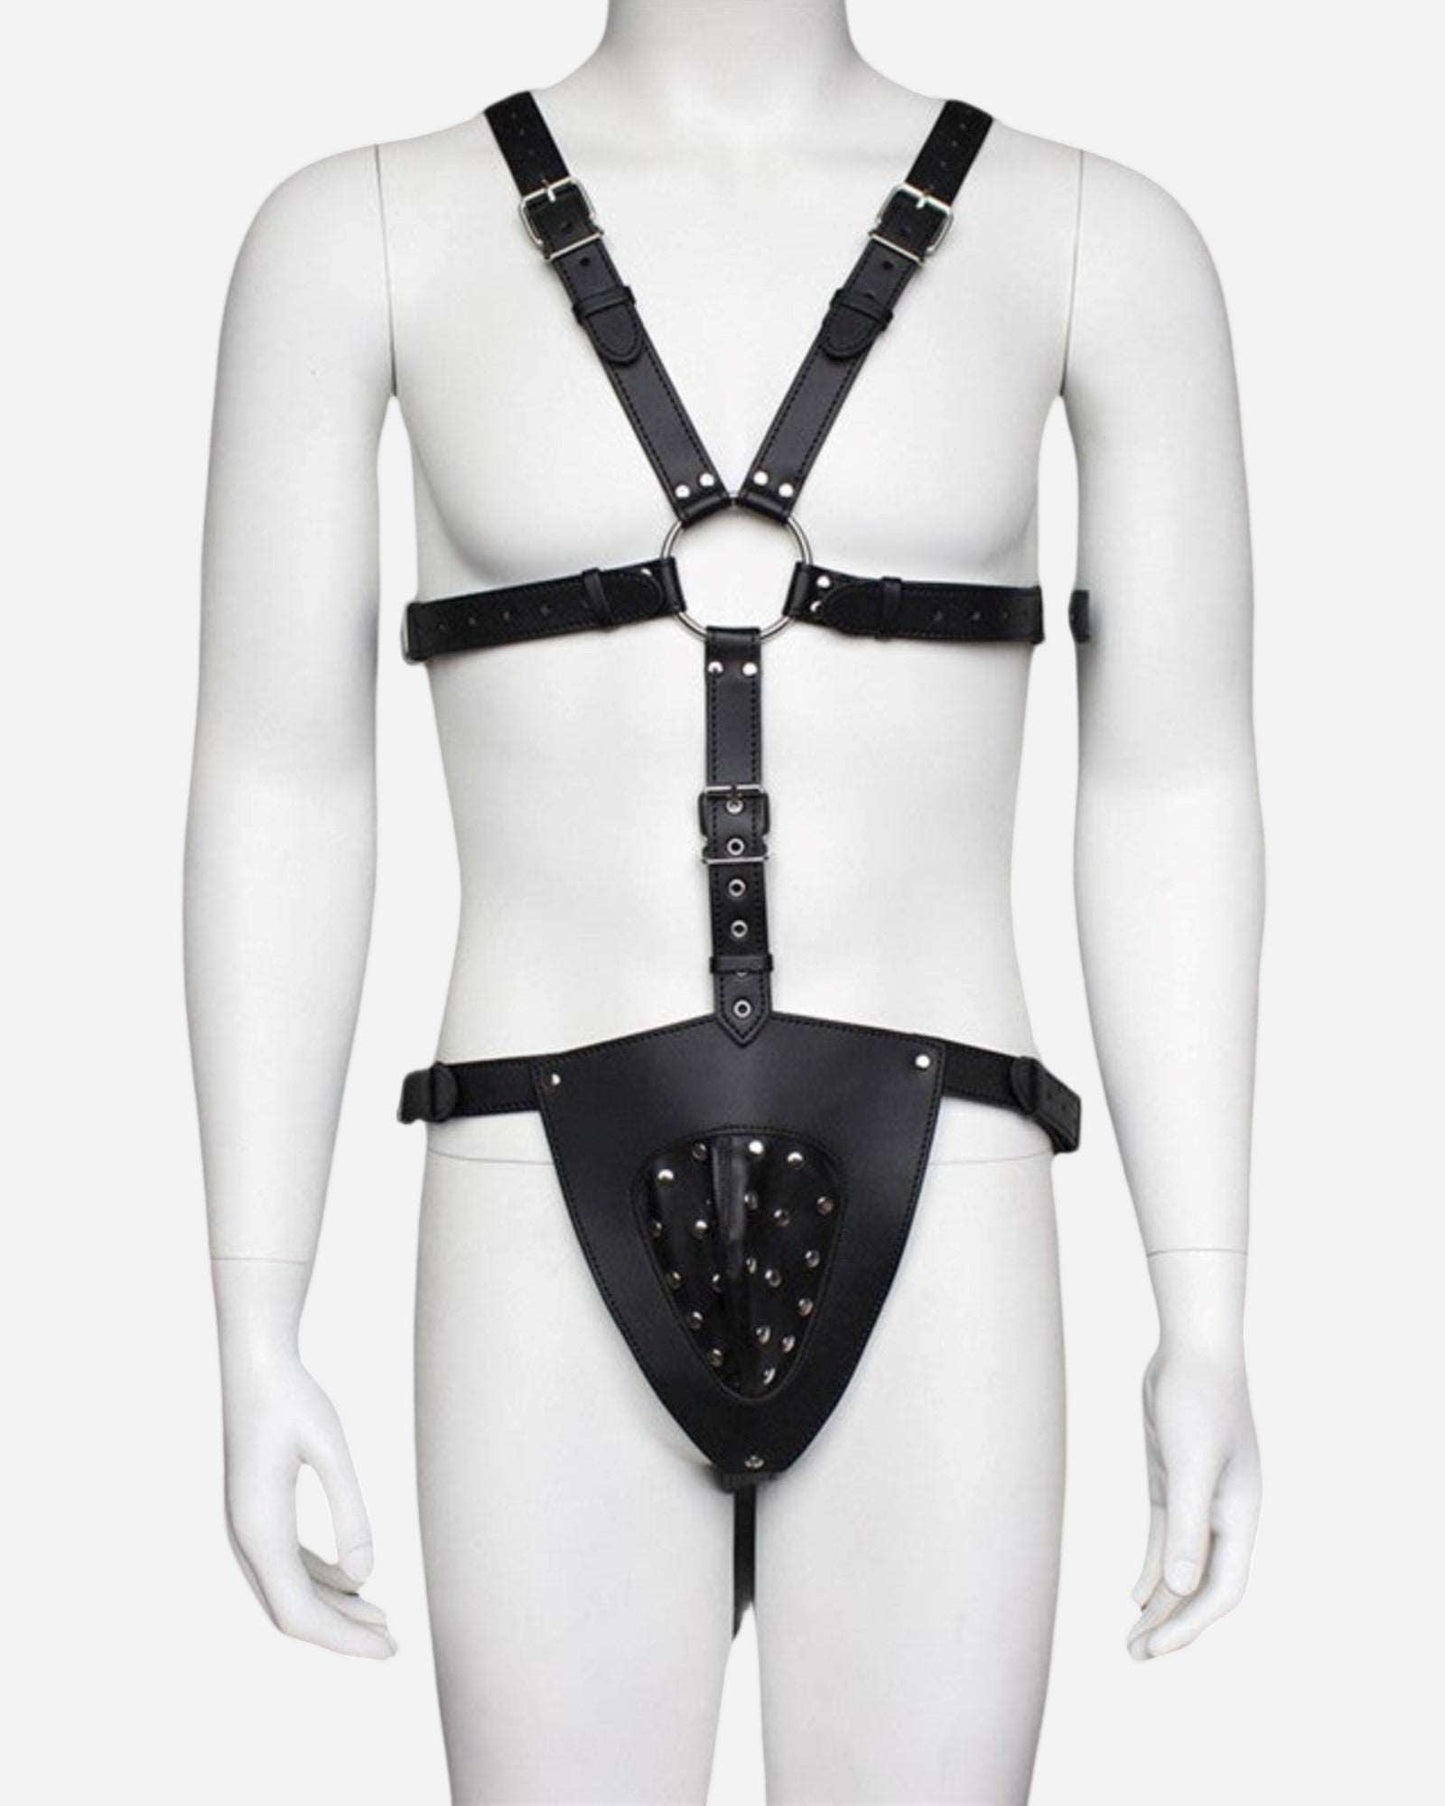 0 BDSM Leather Harness